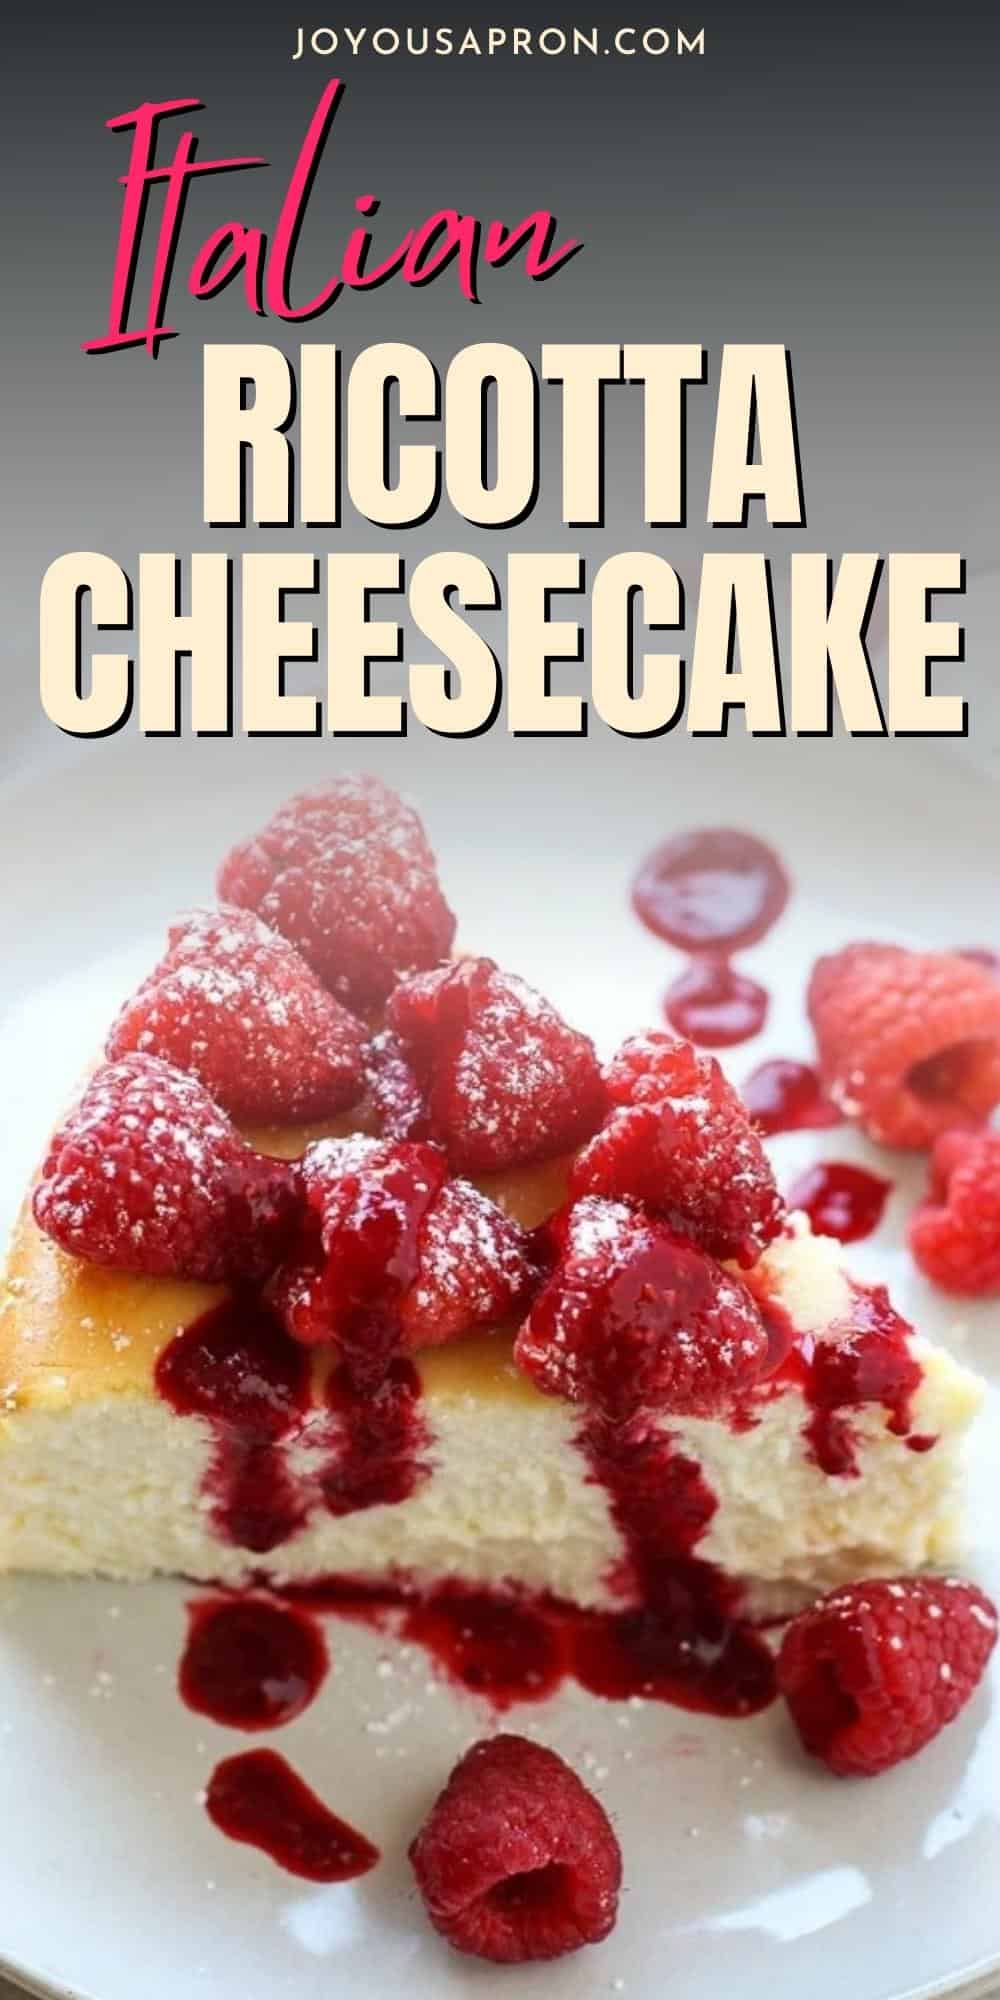 Italian Cheesecake - crustless Italian ricotta cheesecake is the perfect dessert and sweet treat! Light and fluffy, top with fresh raspberry and raspberry sauce for the ultimate cheesecake experience! via @joyousapron